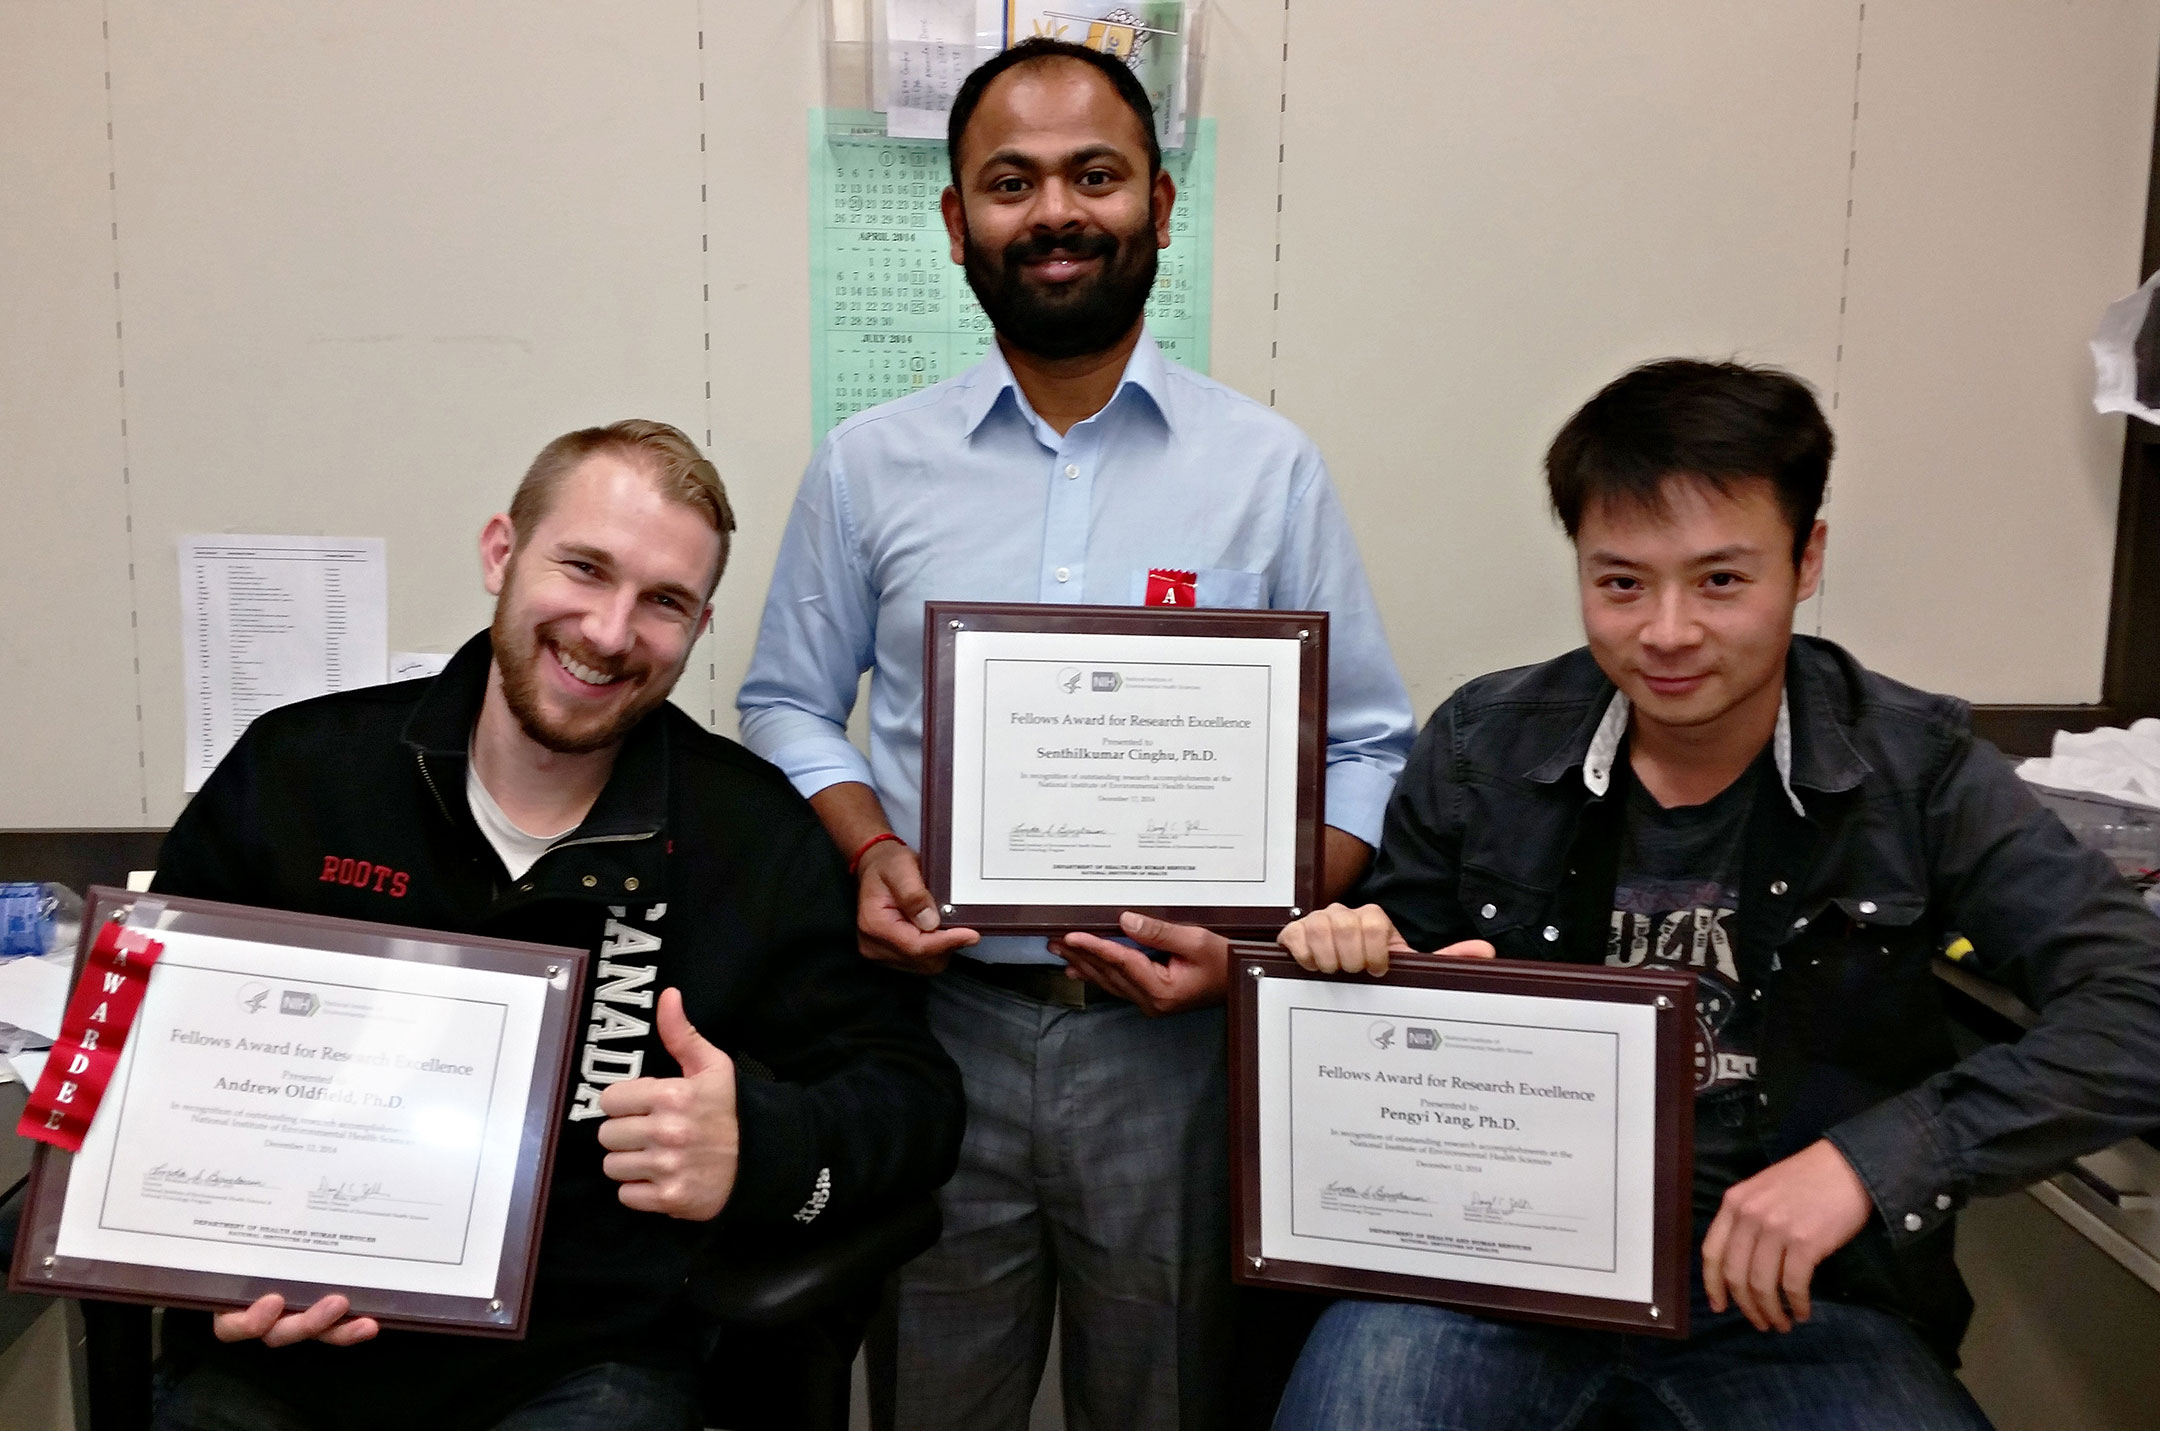 Andrew, Senthil, and Pengyi showing off with their NIH Fellows Award for Research Excellence. This is Senthil's second such award.